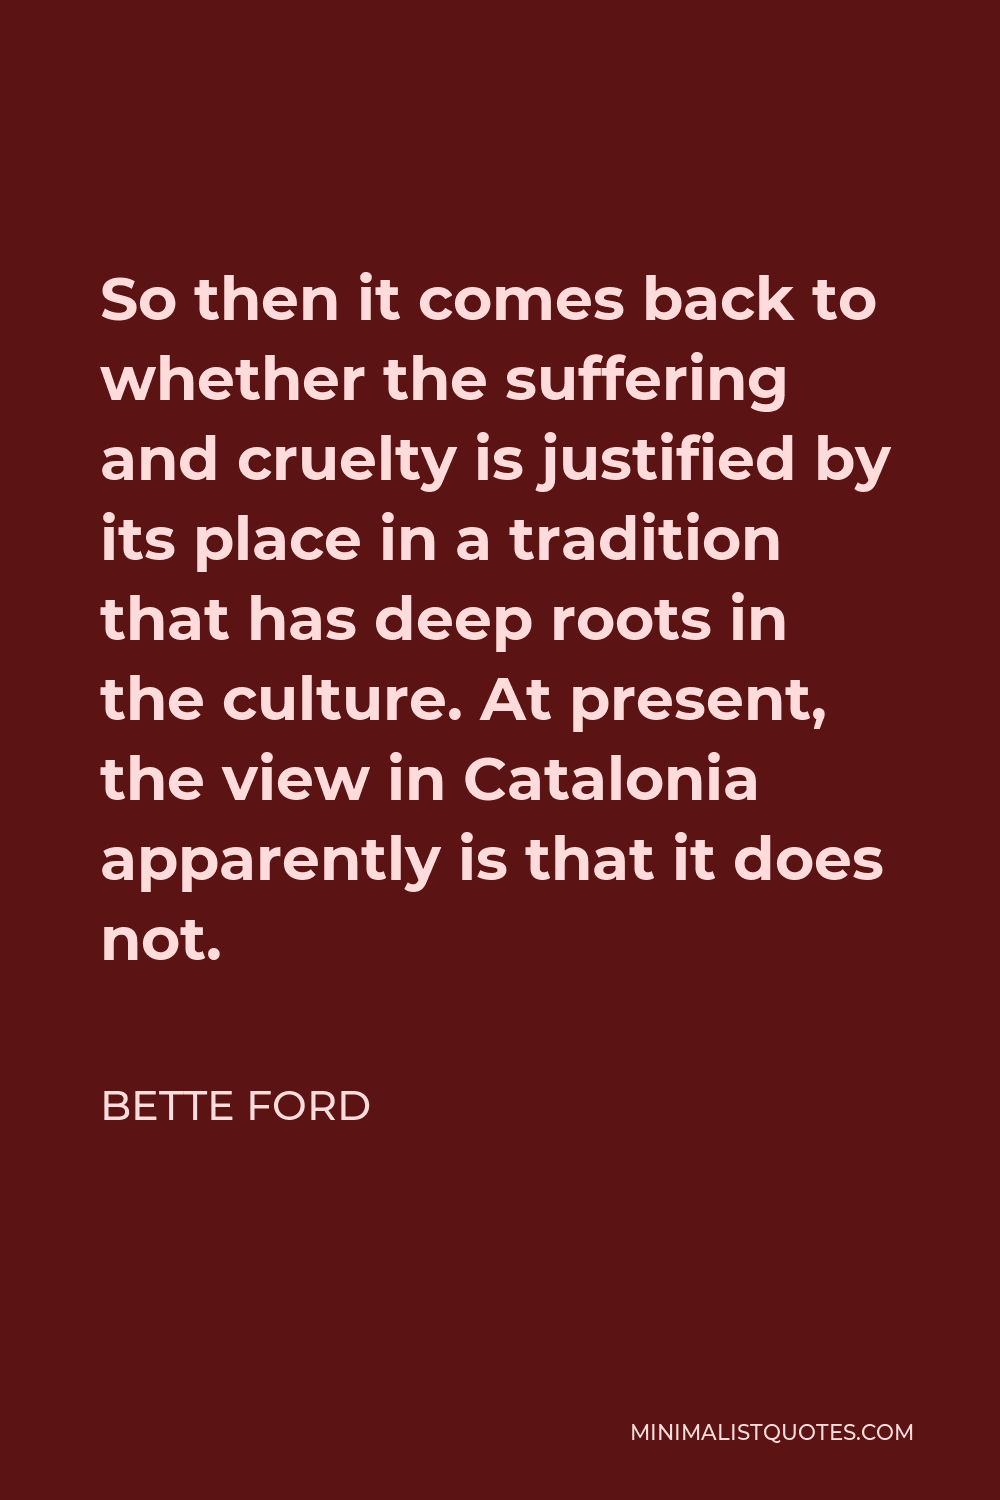 Bette Ford Quote - So then it comes back to whether the suffering and cruelty is justified by its place in a tradition that has deep roots in the culture. At present, the view in Catalonia apparently is that it does not.